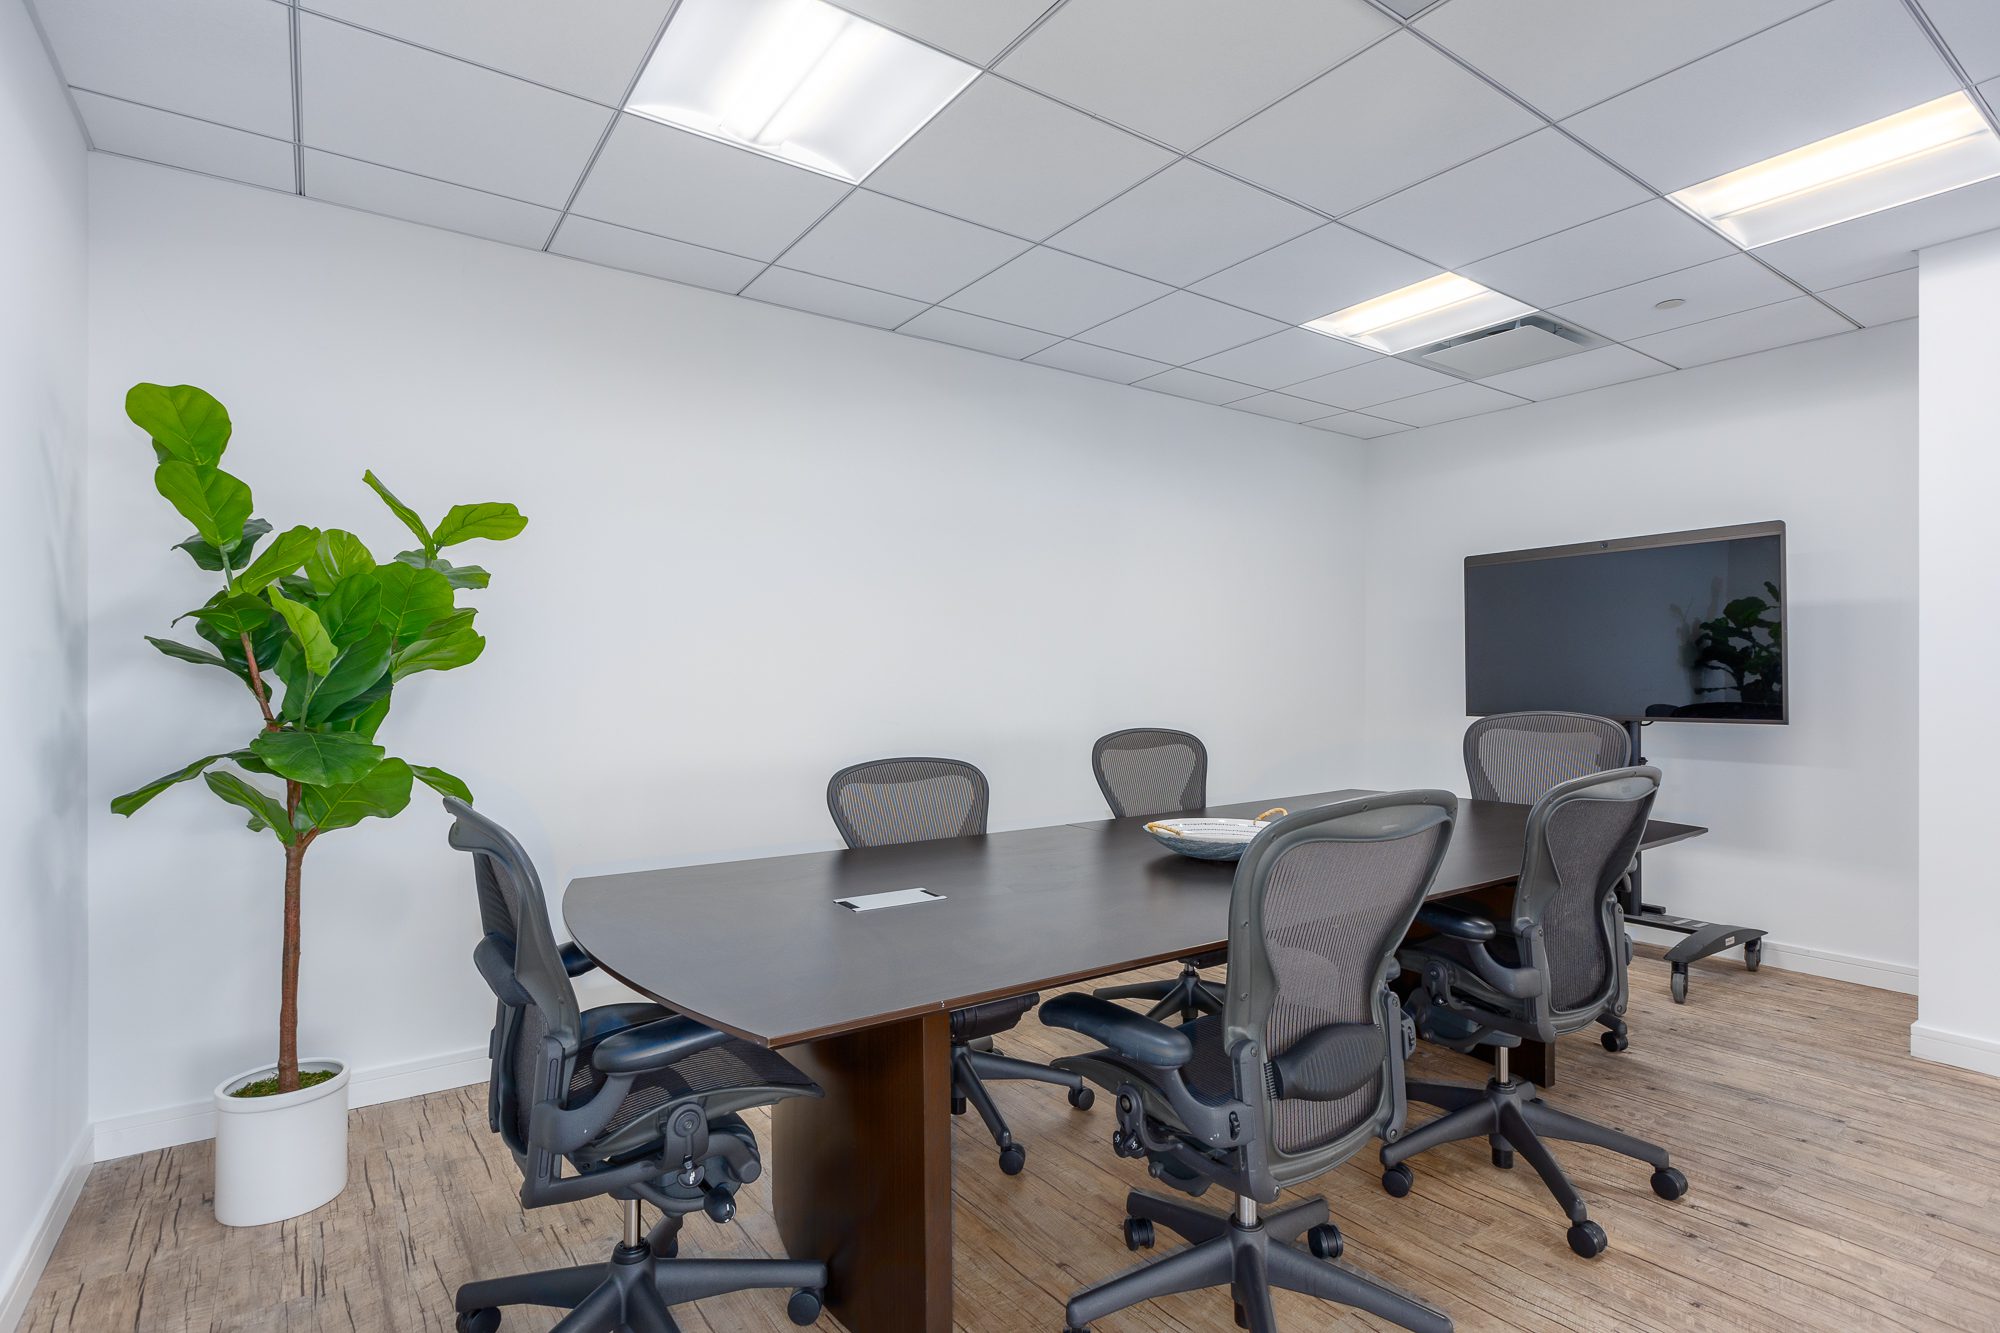 Which Plants Work Best in an Office?